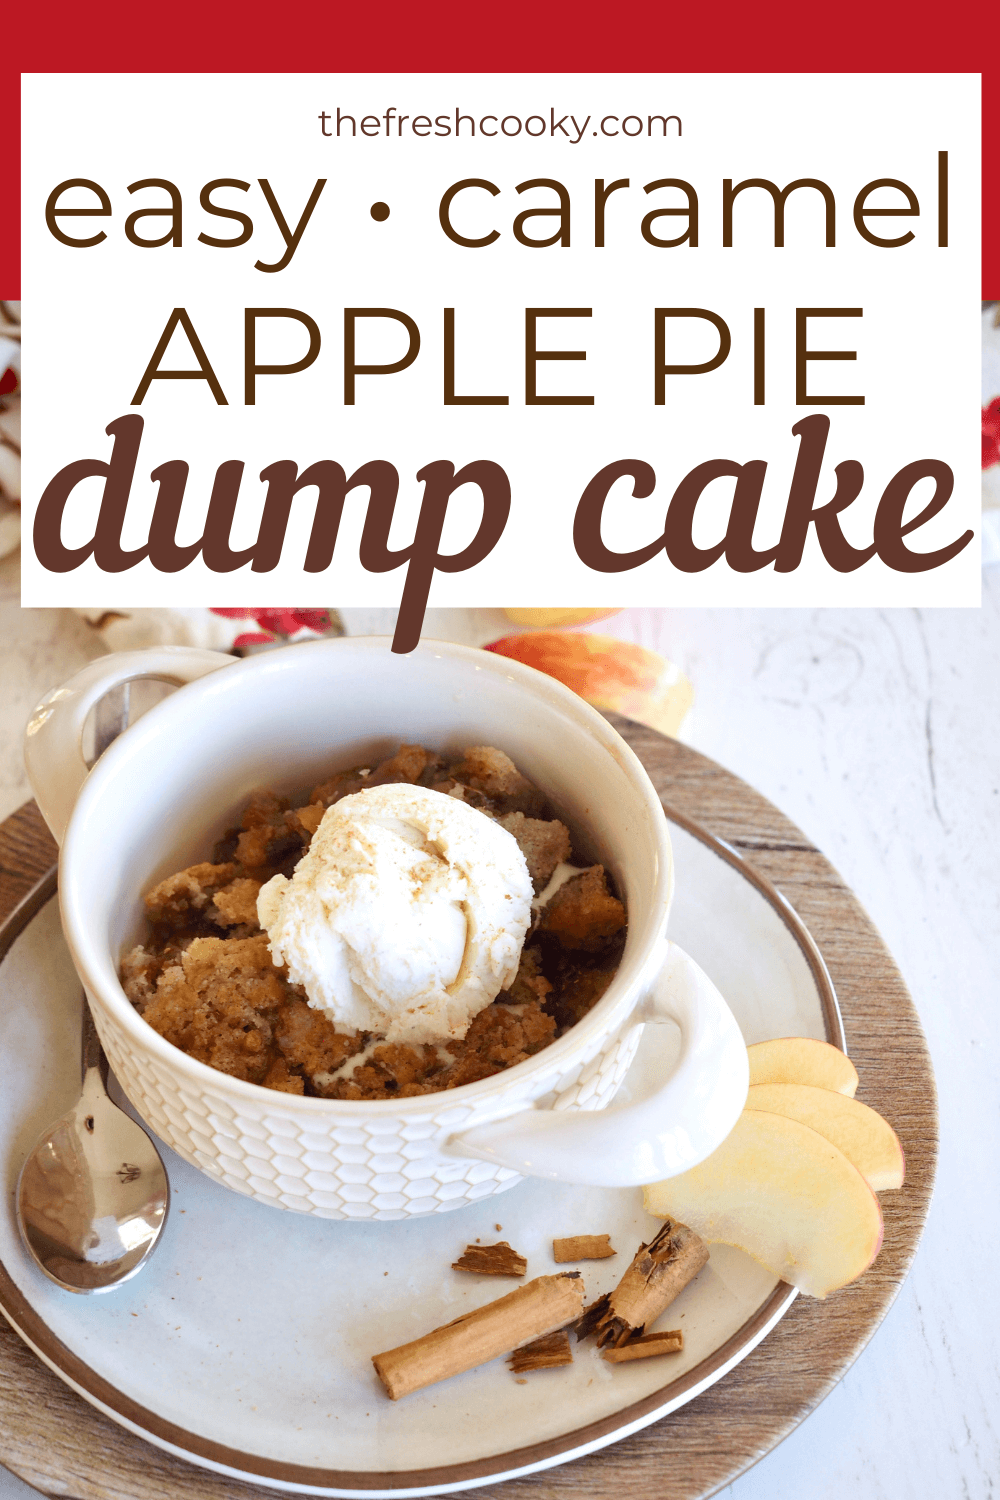 Pin for easy caramel apple dump cake with dump cake in bowl and topped with scoop of vanilla ice cream, slices of apples on side of plate with cinnamon stick.